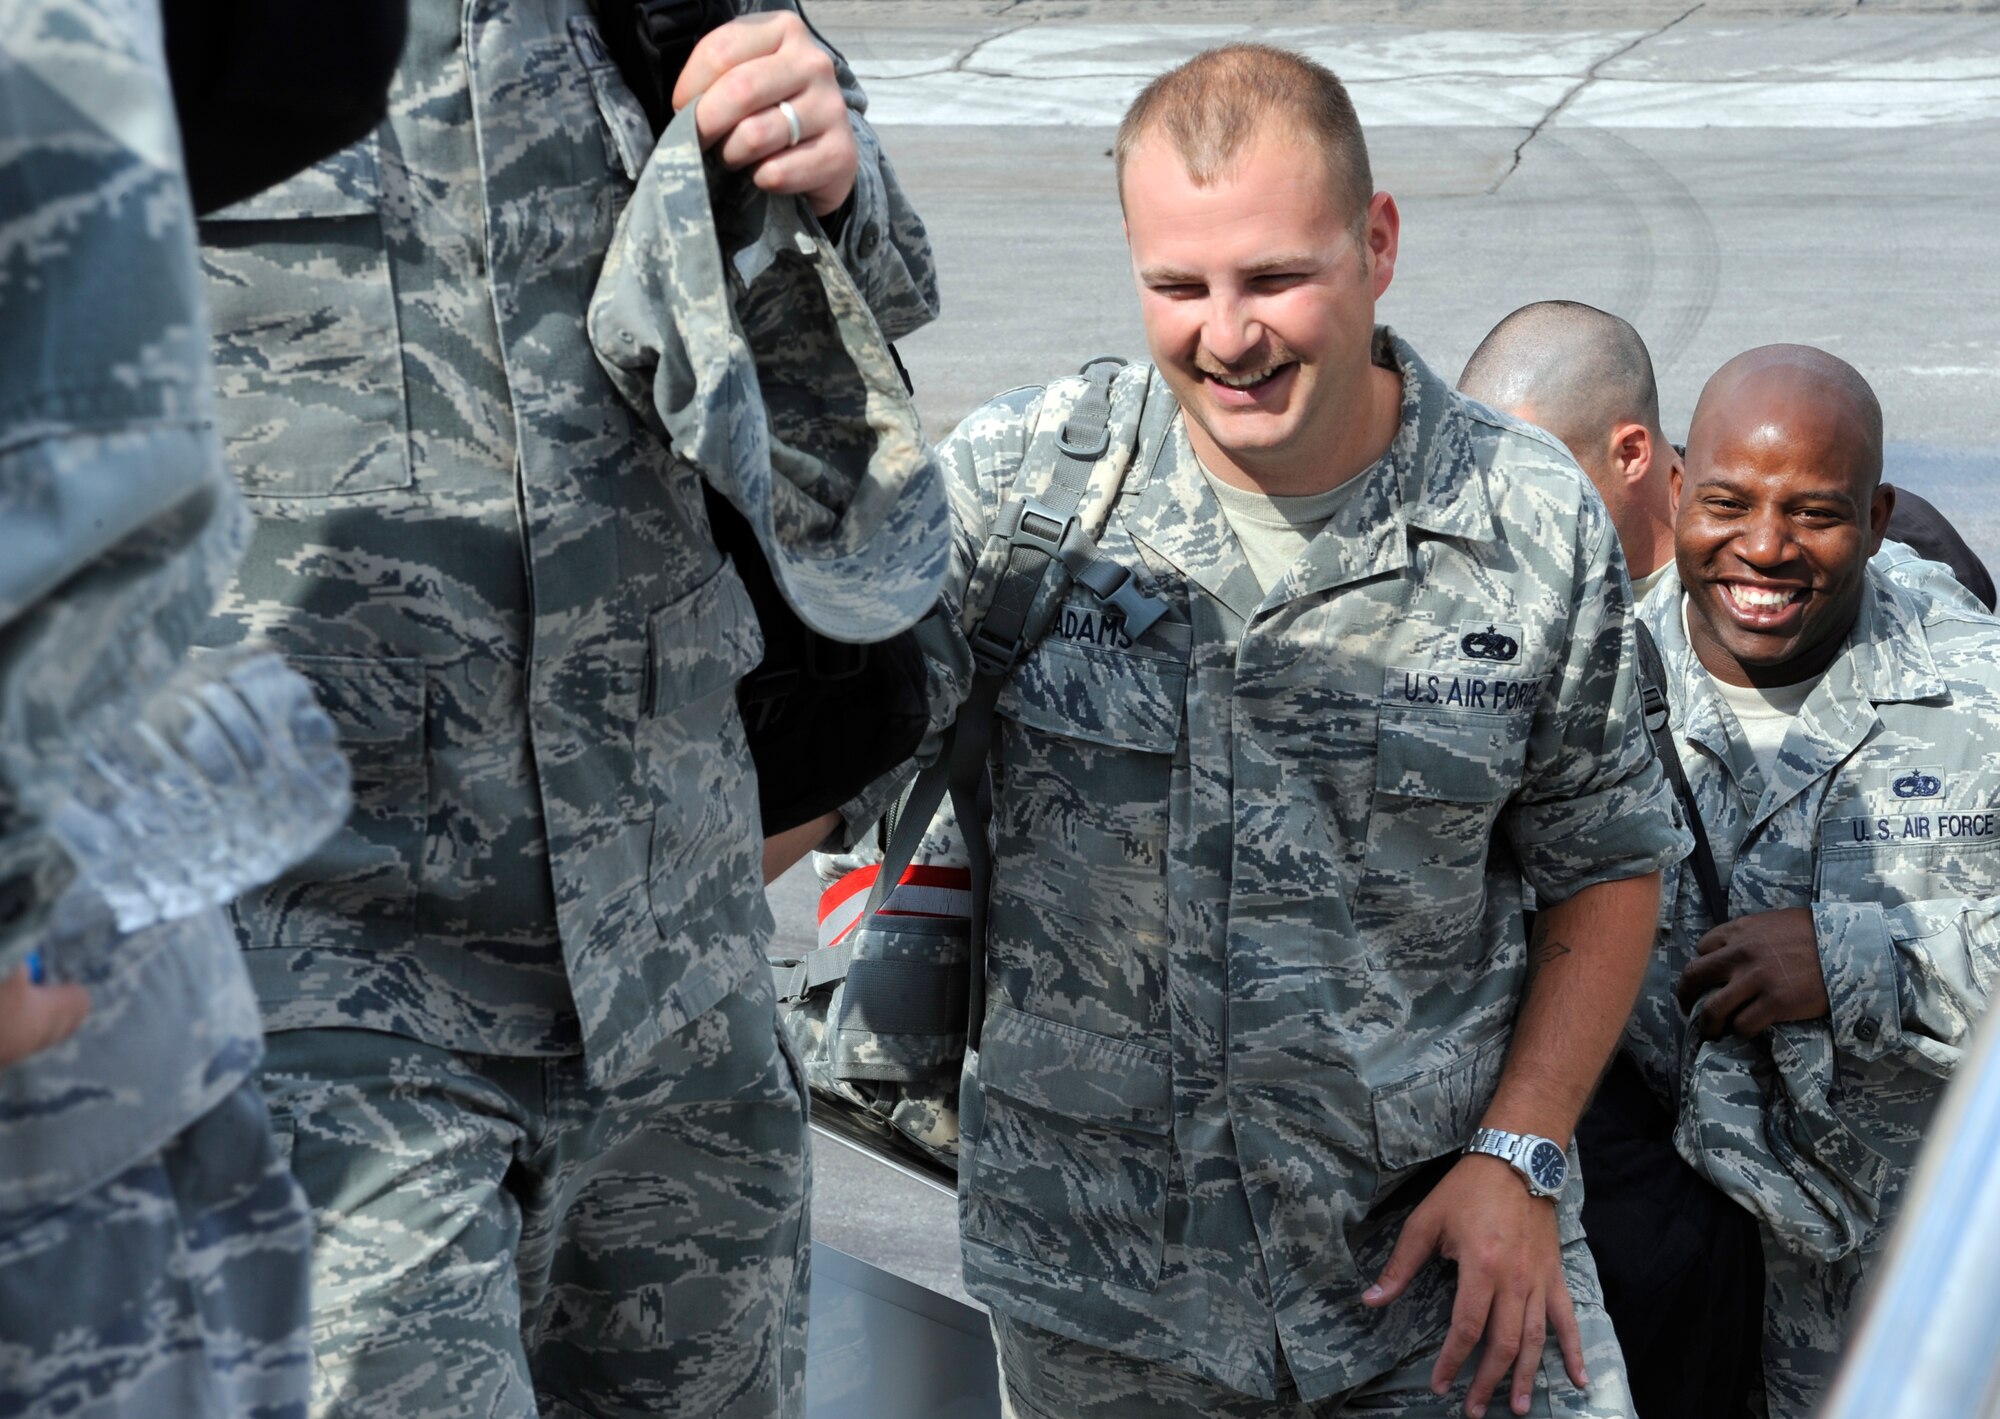 Two Ellsworth Airmen share a laugh prior to boarding a plane on the flightline at Ellsworth Air Force Base, S.D., July 21, 2012. Approximately 350 Airmen deployed to Southwest Asia July 21 to support missions in the U.S. Central Command area of responsibility. (U.S. Air Force photo by Airman Ashley J. Cass/Released)